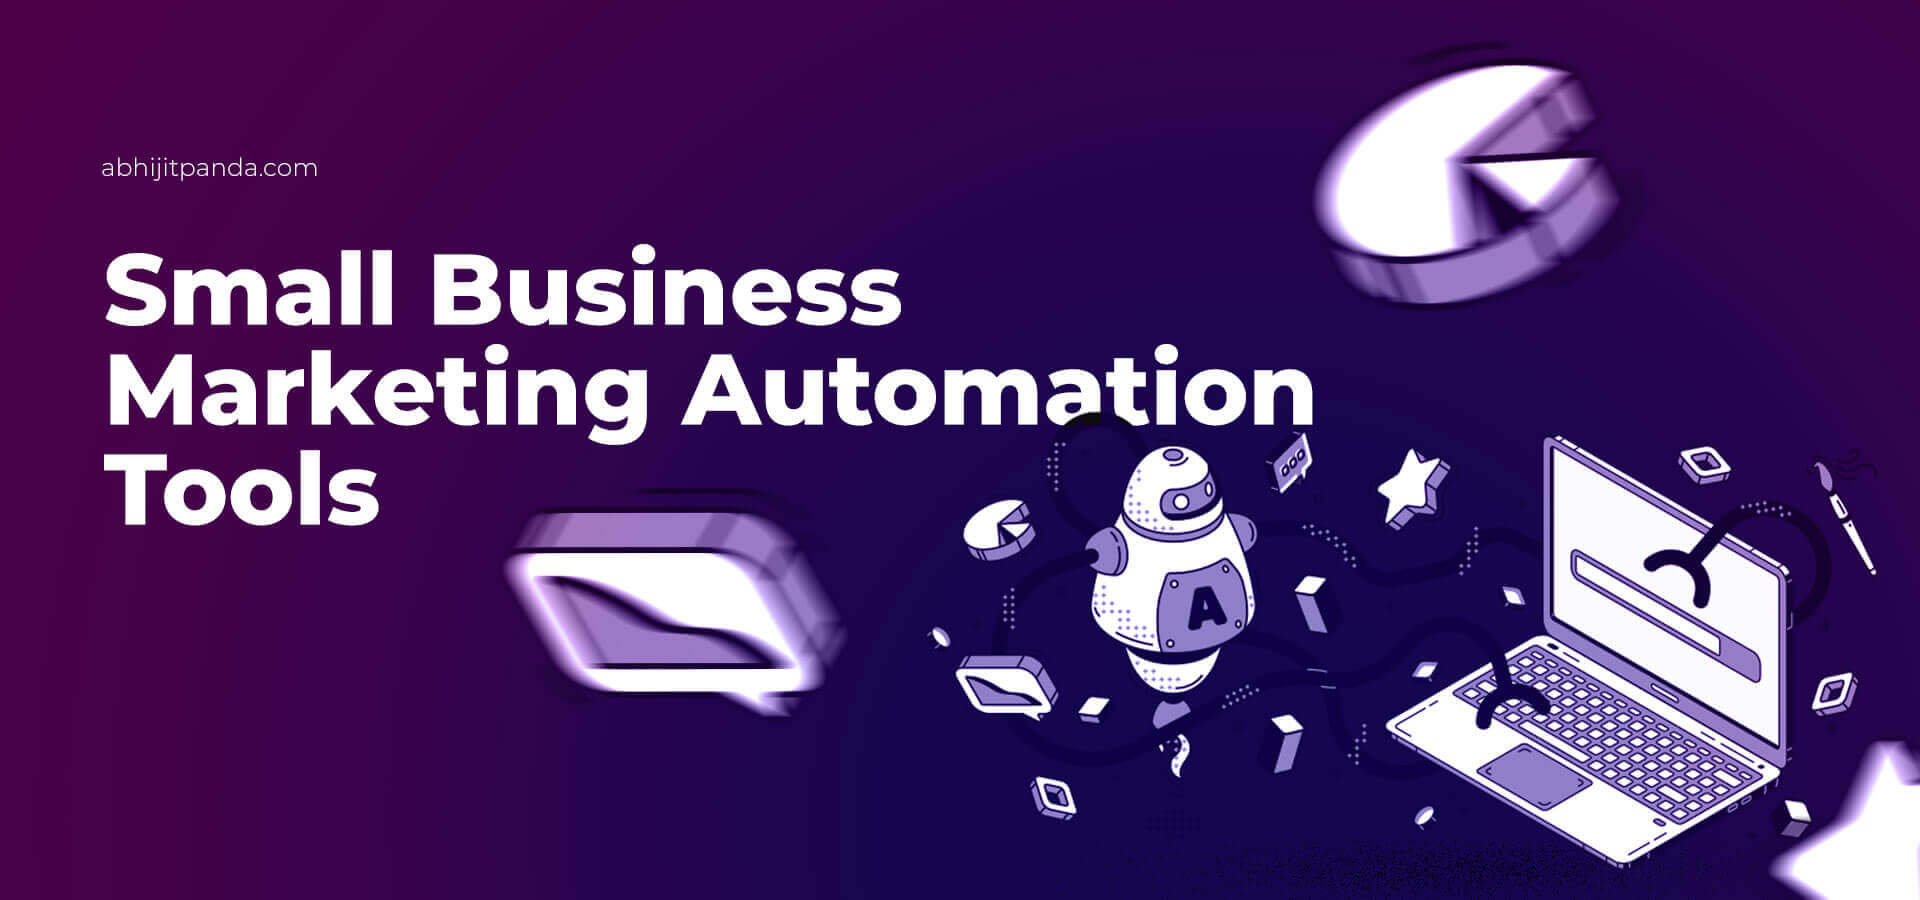 Small Business Marketing Automation Tools